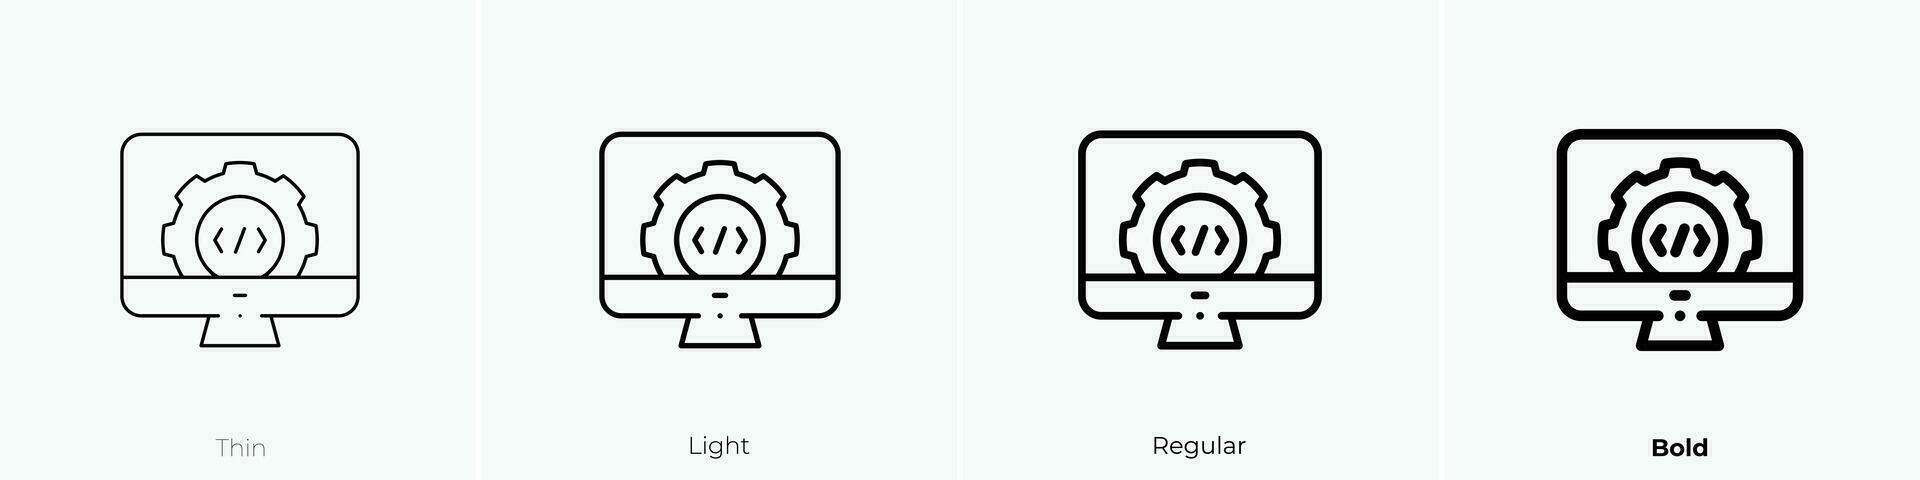 settings icon. Thin, Light, Regular And Bold style design isolated on white background vector